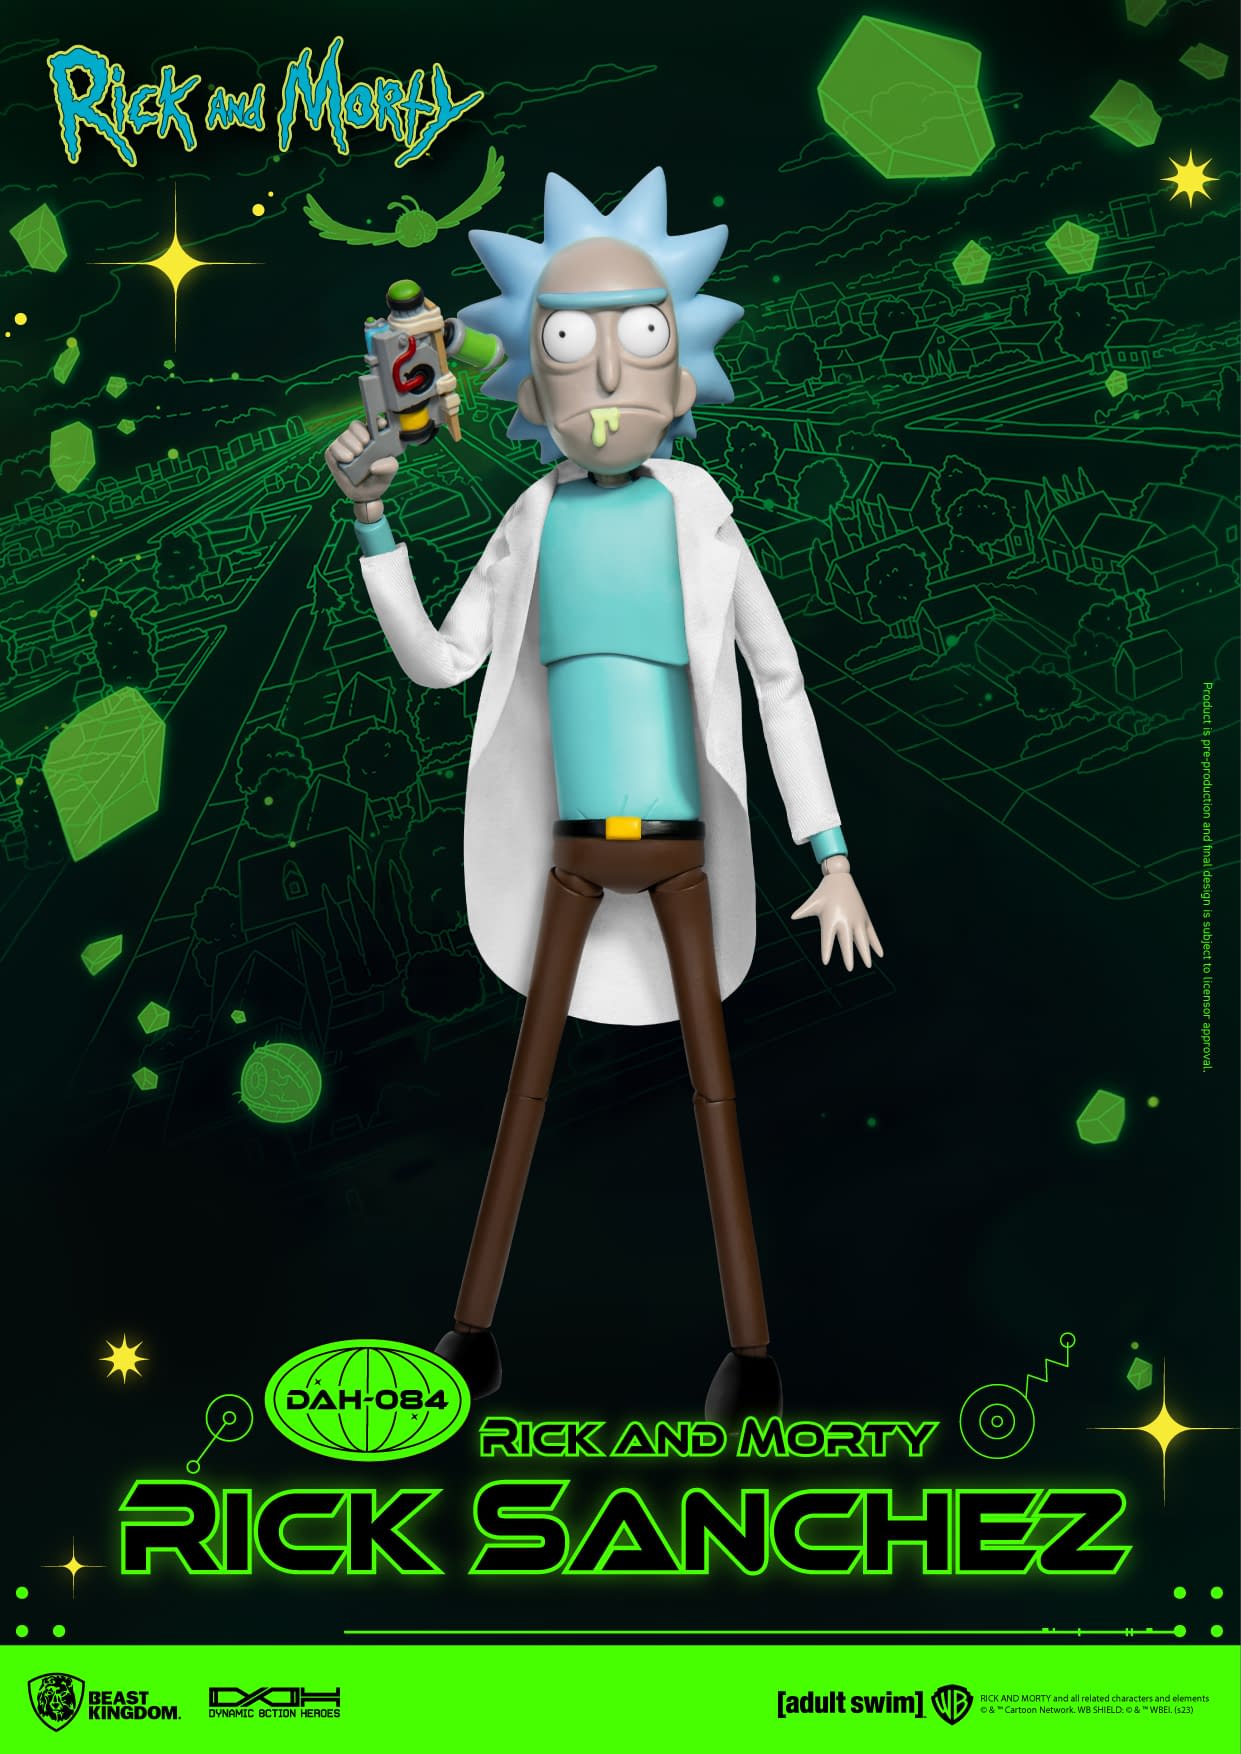 Morty Smith Goes Solo with Beast Kingdom's Rick and Morty DAH Line